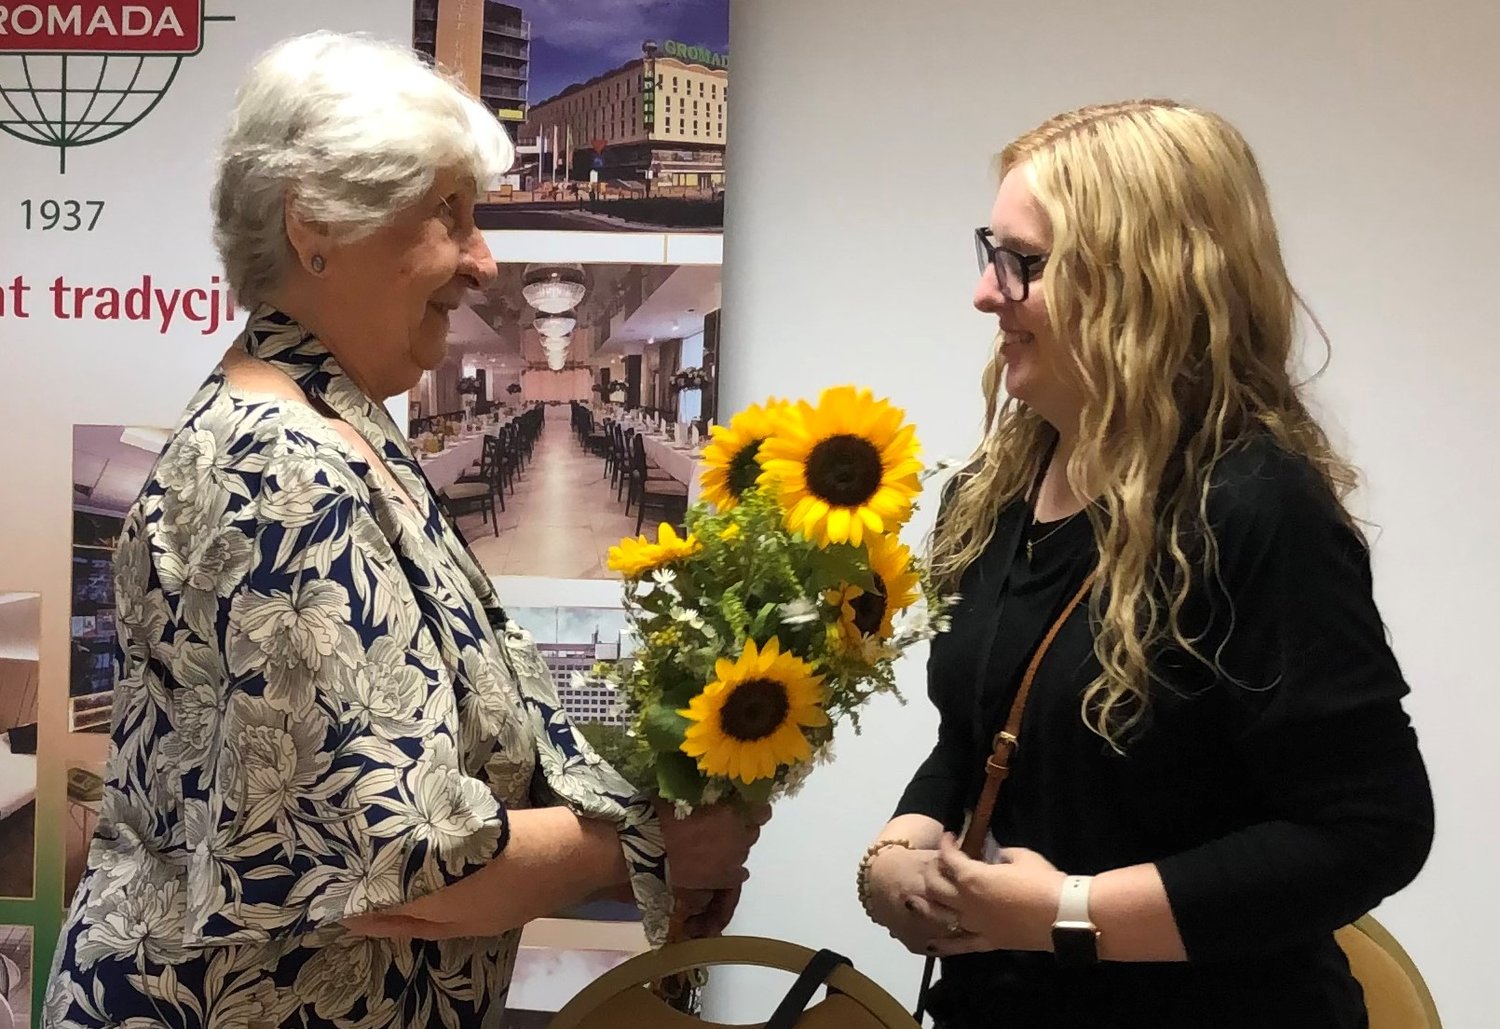 Helias Catholic High School teacher Sarah Kempker, right, presents flowers to Janina Iwanska, a Polish survivor of the Warsaw Uprising and Auschwitz, after Ms. Iwańska shared her story with the members of the Auschwitz-Birkenau Memorial and Museum's International Summer Academy in Poland.